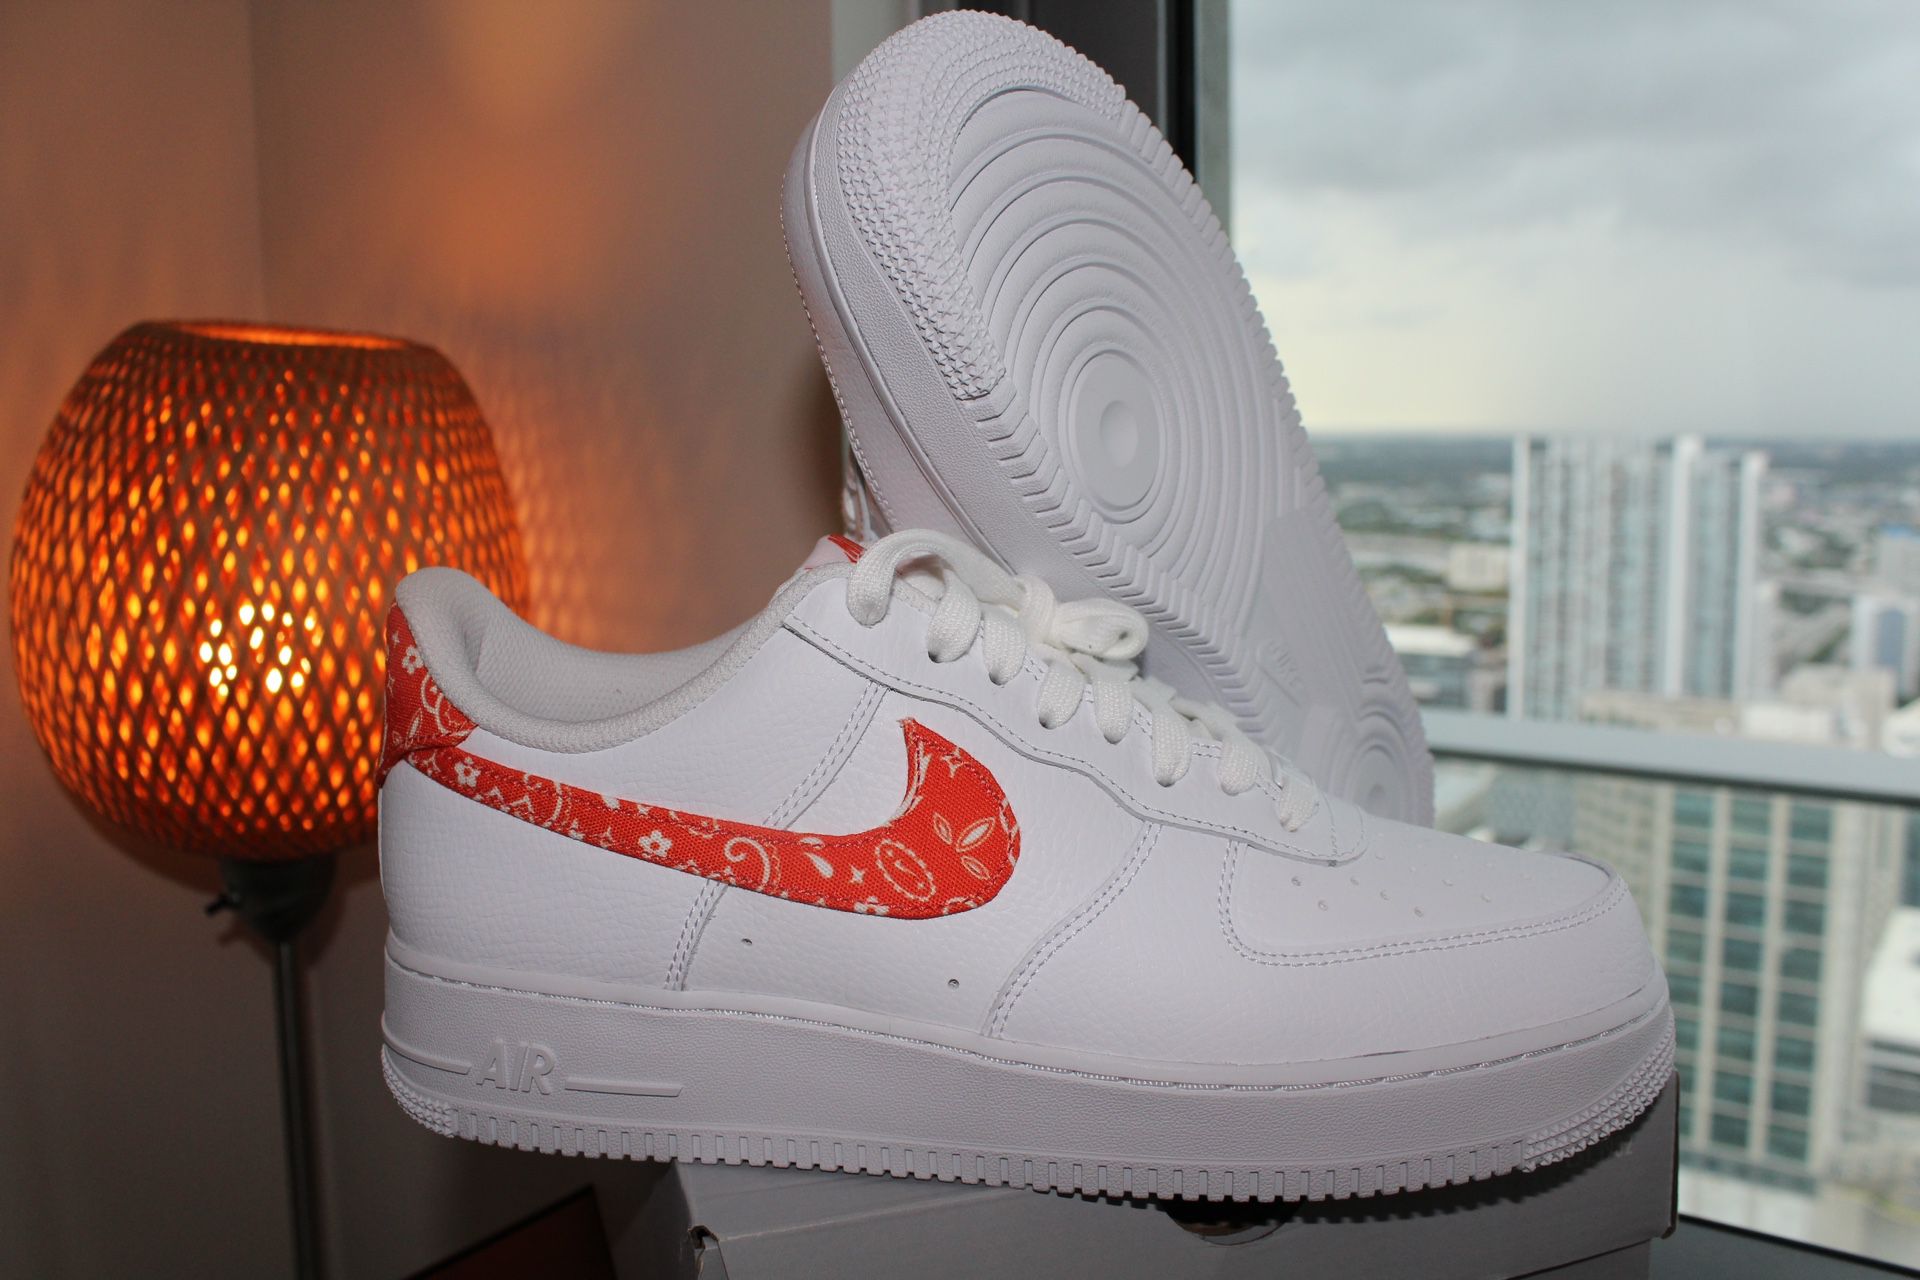 Nike Air Force 1 Low Orange Paisley Size 11 Womens / 9.5 Men's DJ9942-102  for Sale in Miami, FL - OfferUp